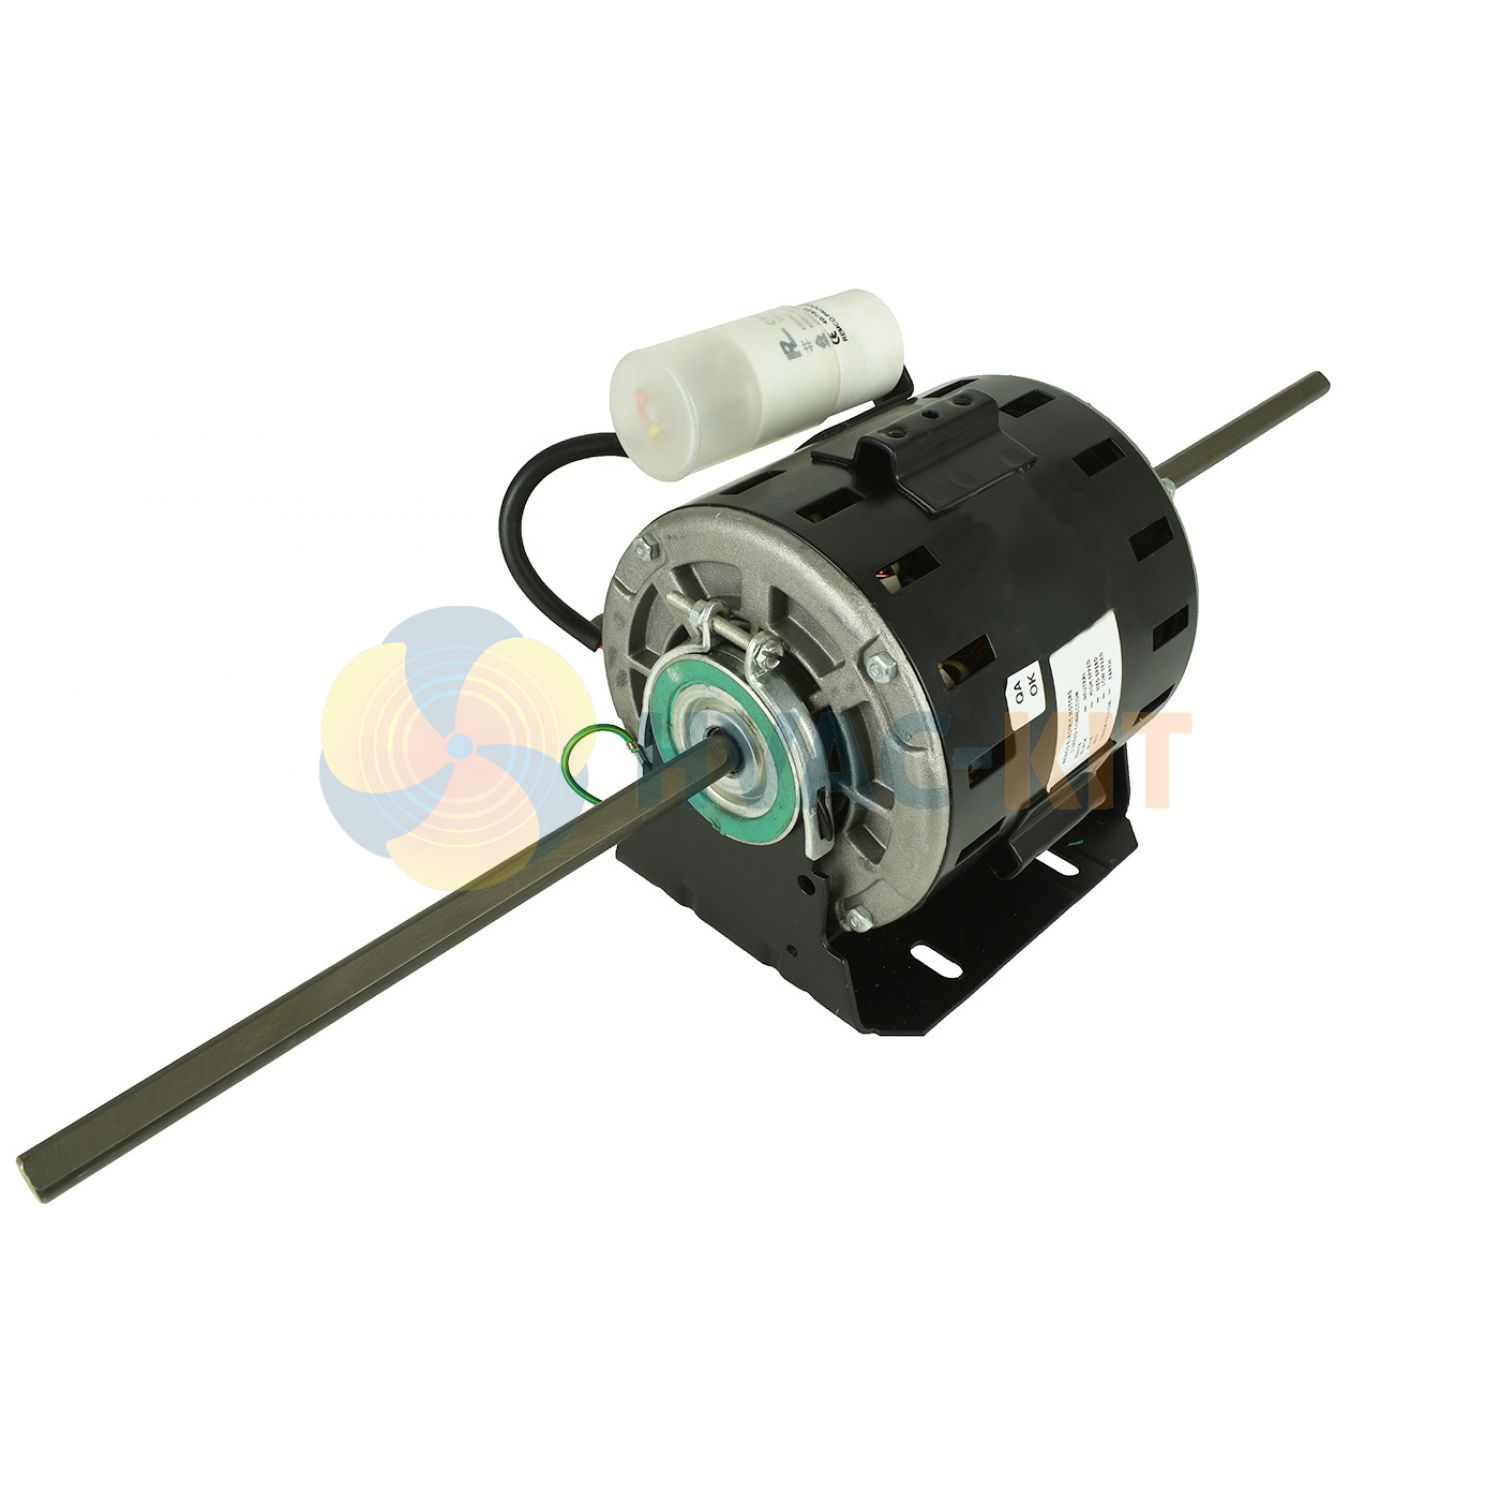 55-4-750/3DS_2 Resilient Base Mount Motor (55R/B56)